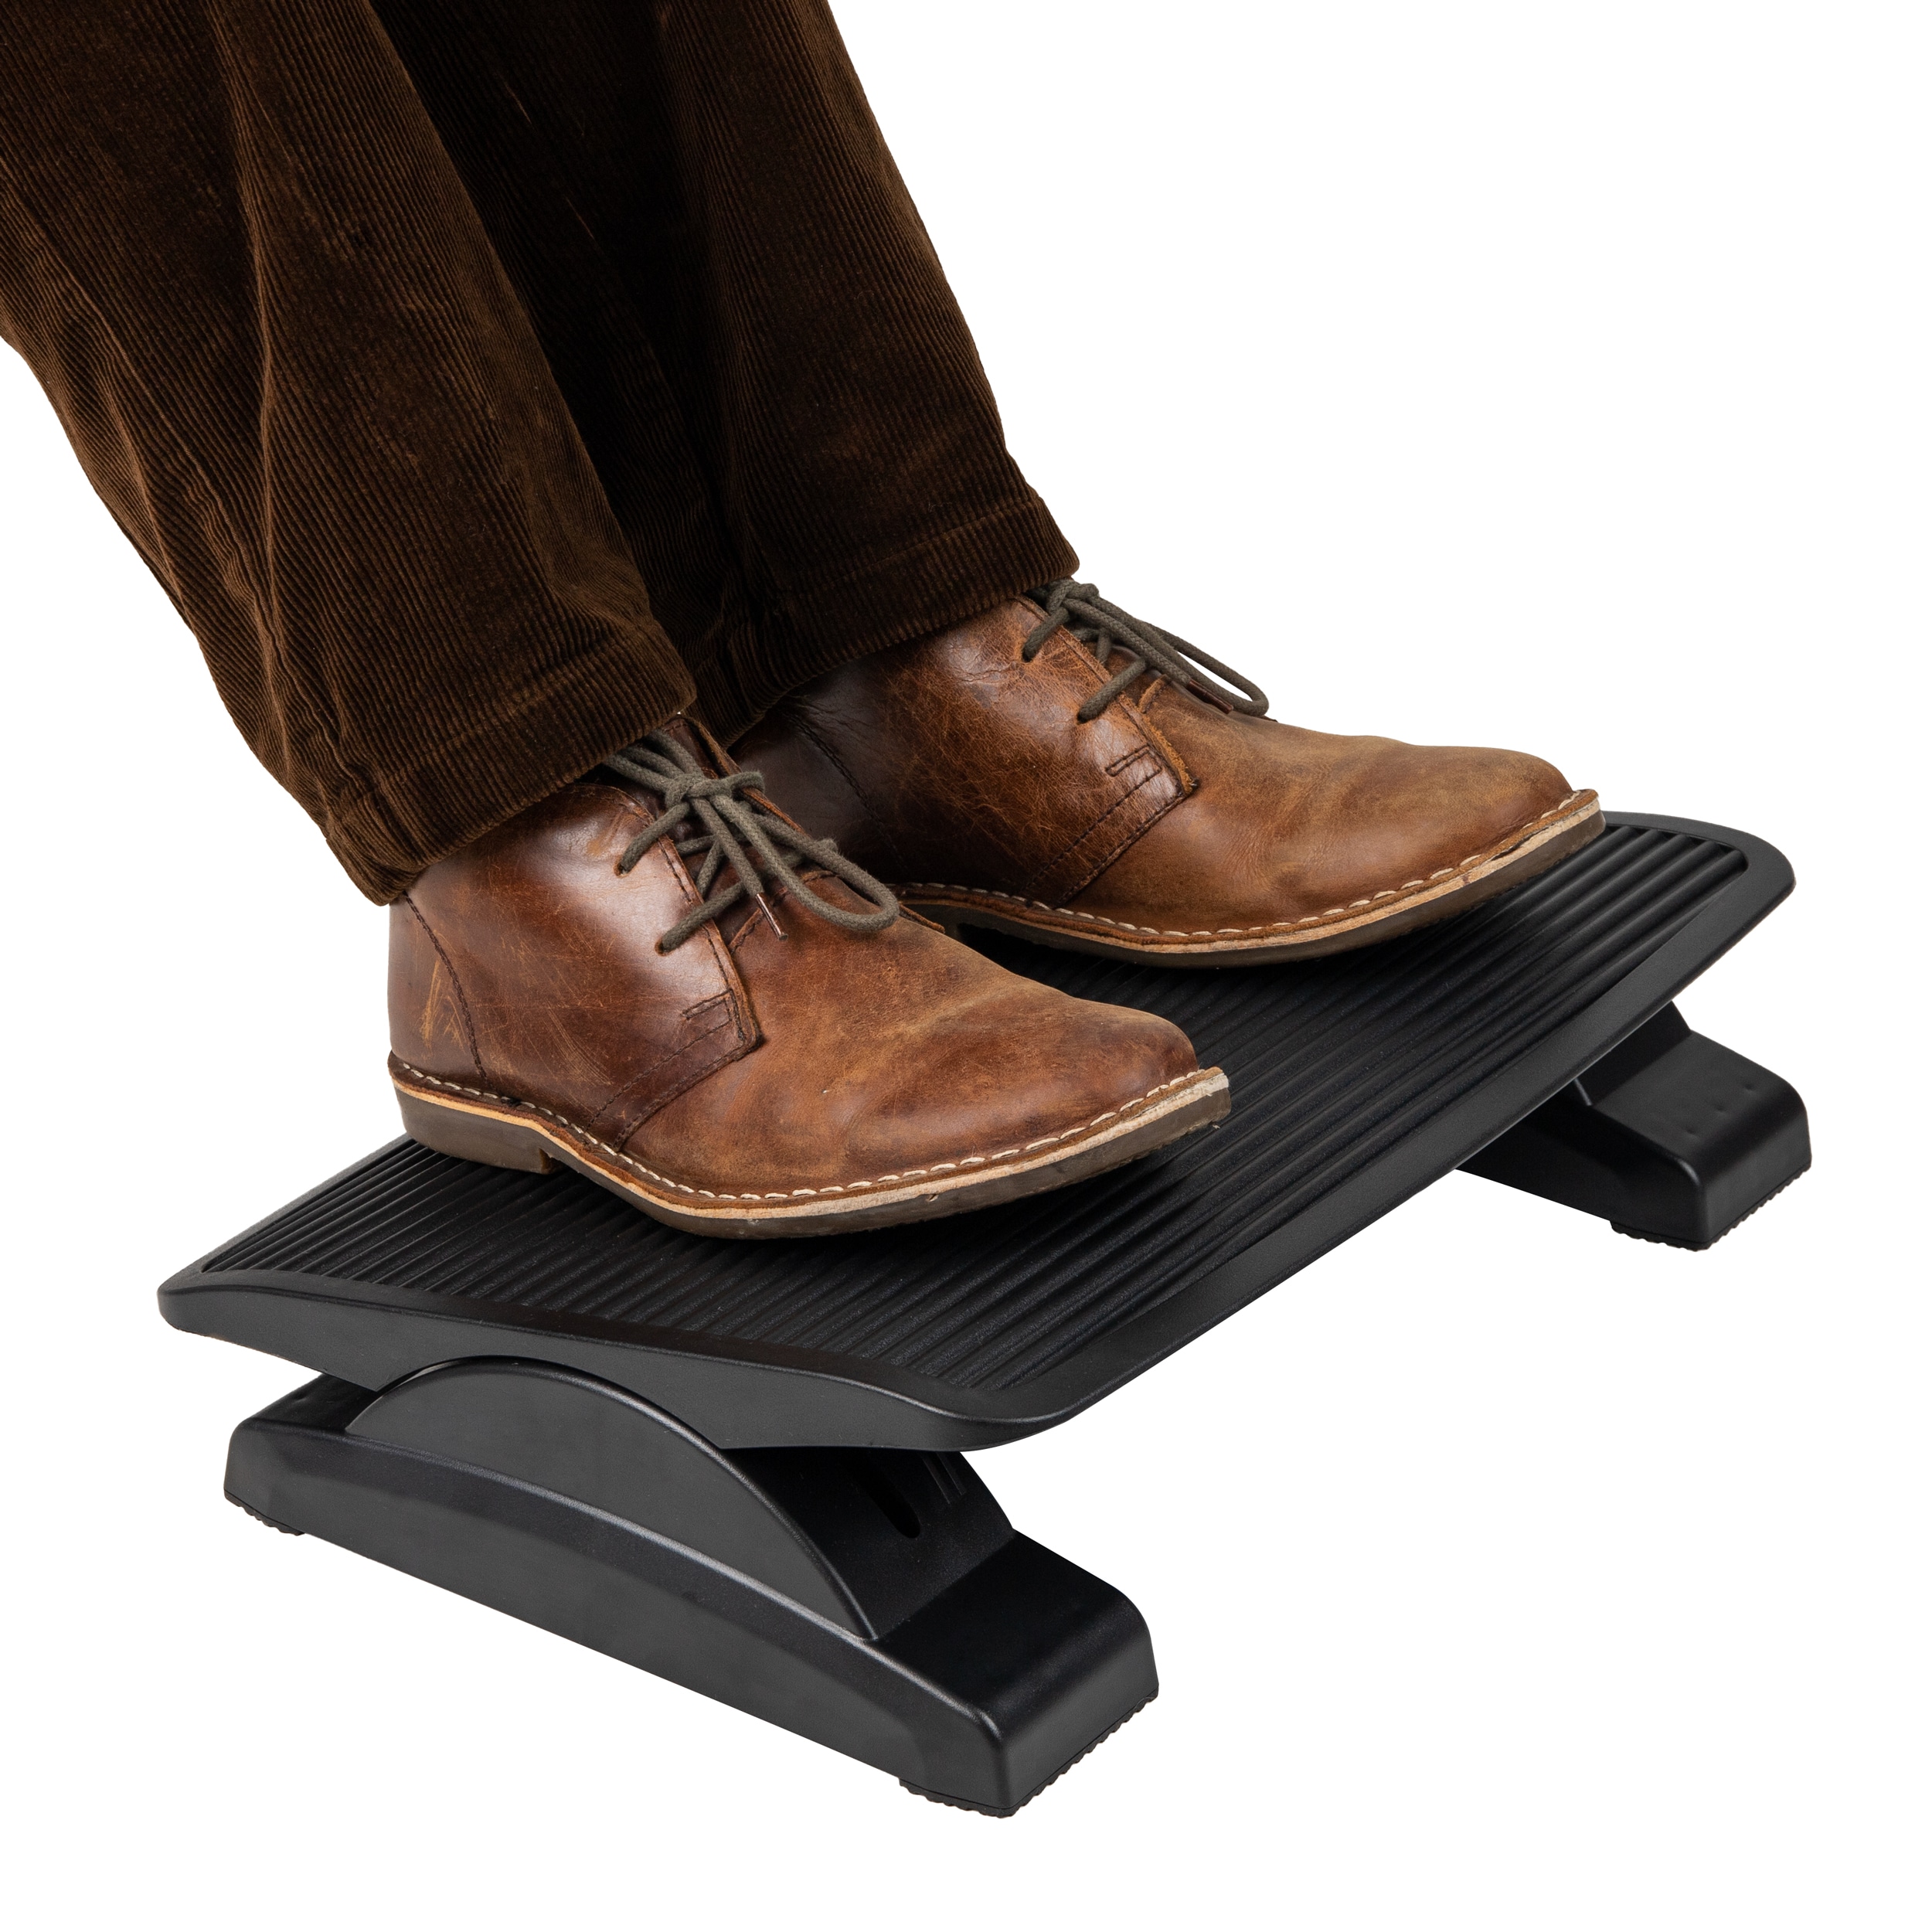 Ergonomic Footrest Leather Accessory to Any Desk. Under Desk Foot Rest for  Improved Posture, and Orthopedic Relief 